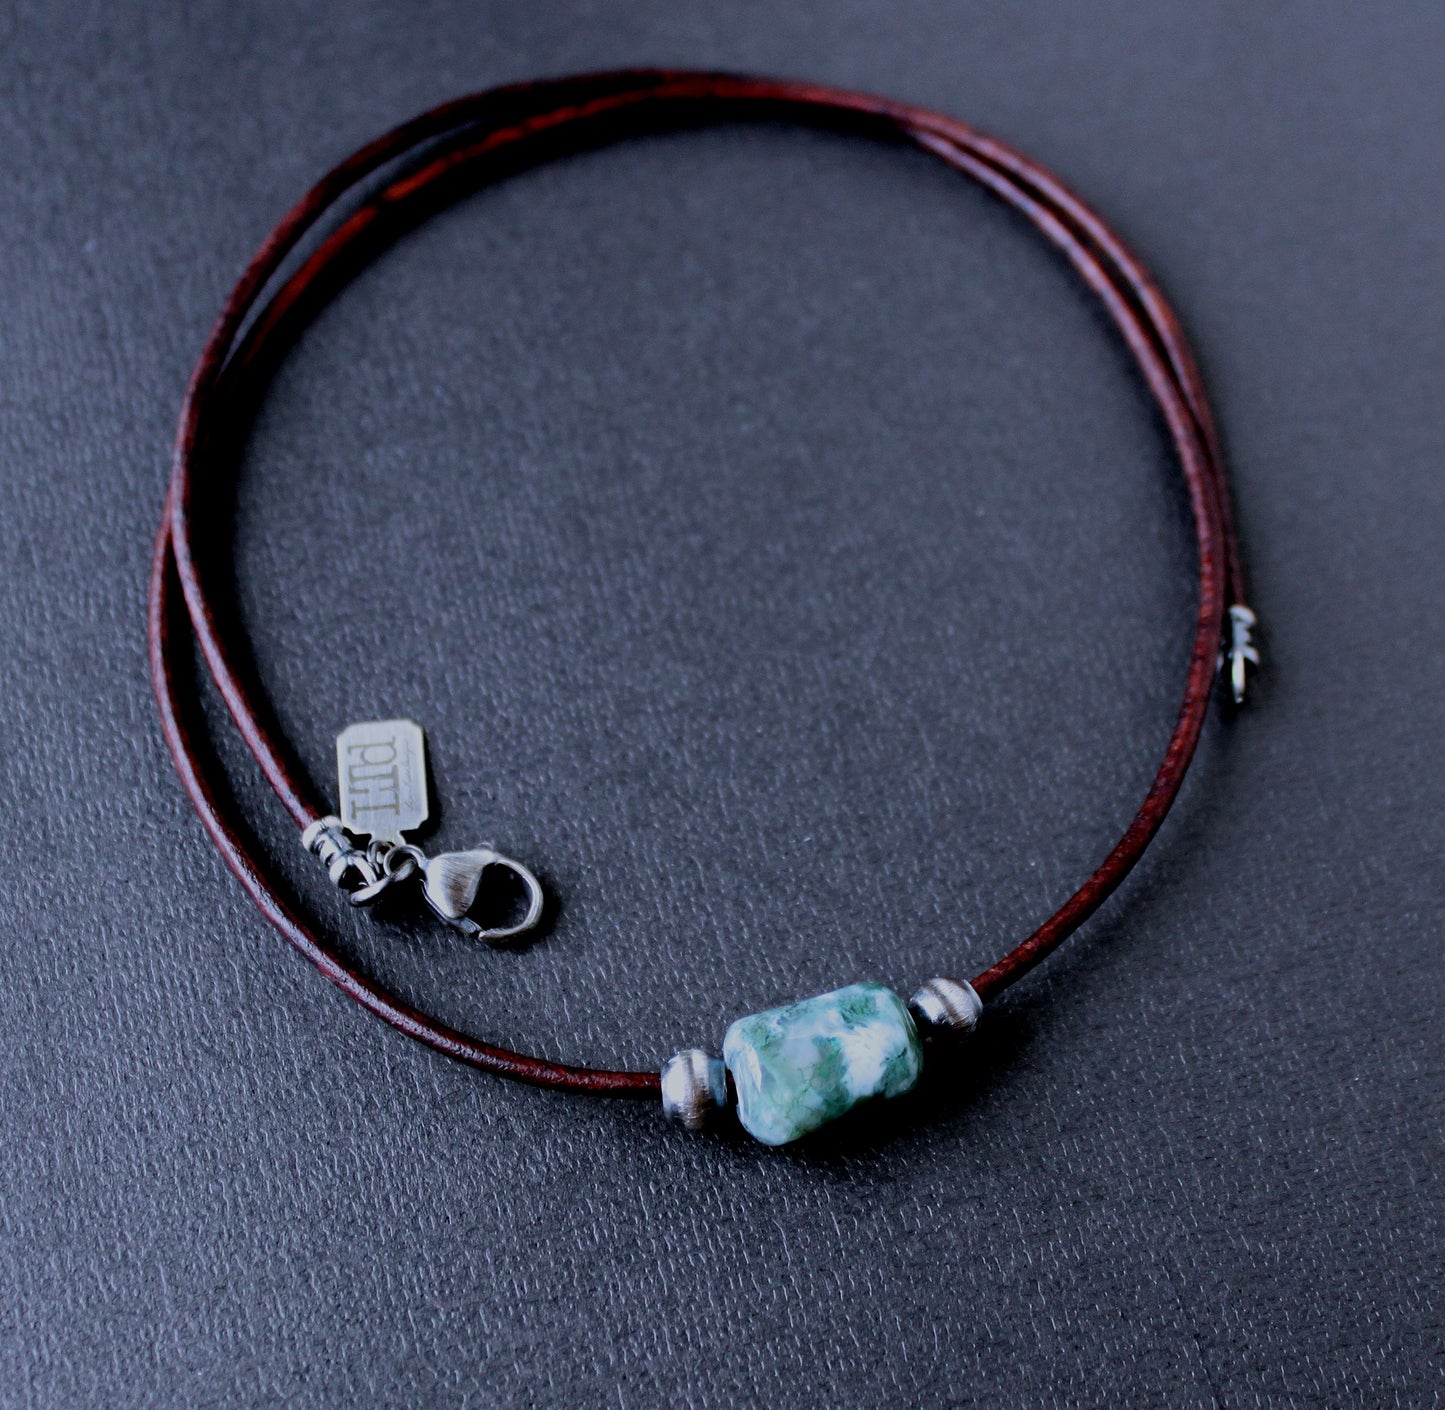 men's leather cord and bead necklace